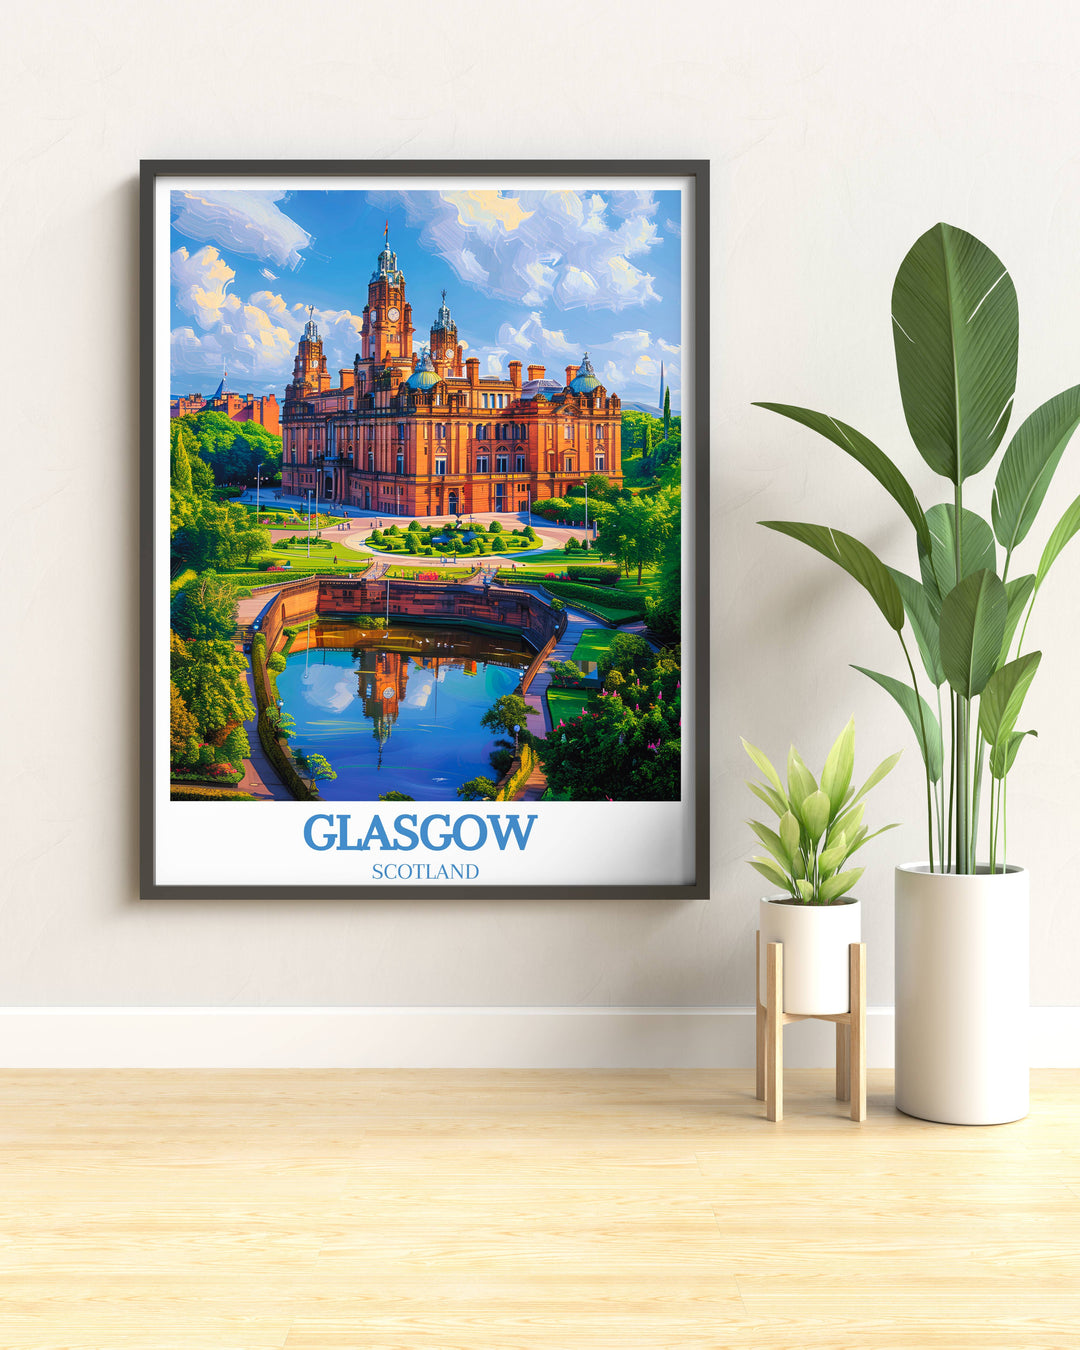 Featuring iconic landmarks, our printable Glasgow Scotland travel posters blend historic charm with contemporary design, making them a perfect addition for anyone collecting Glasgow print and poster art